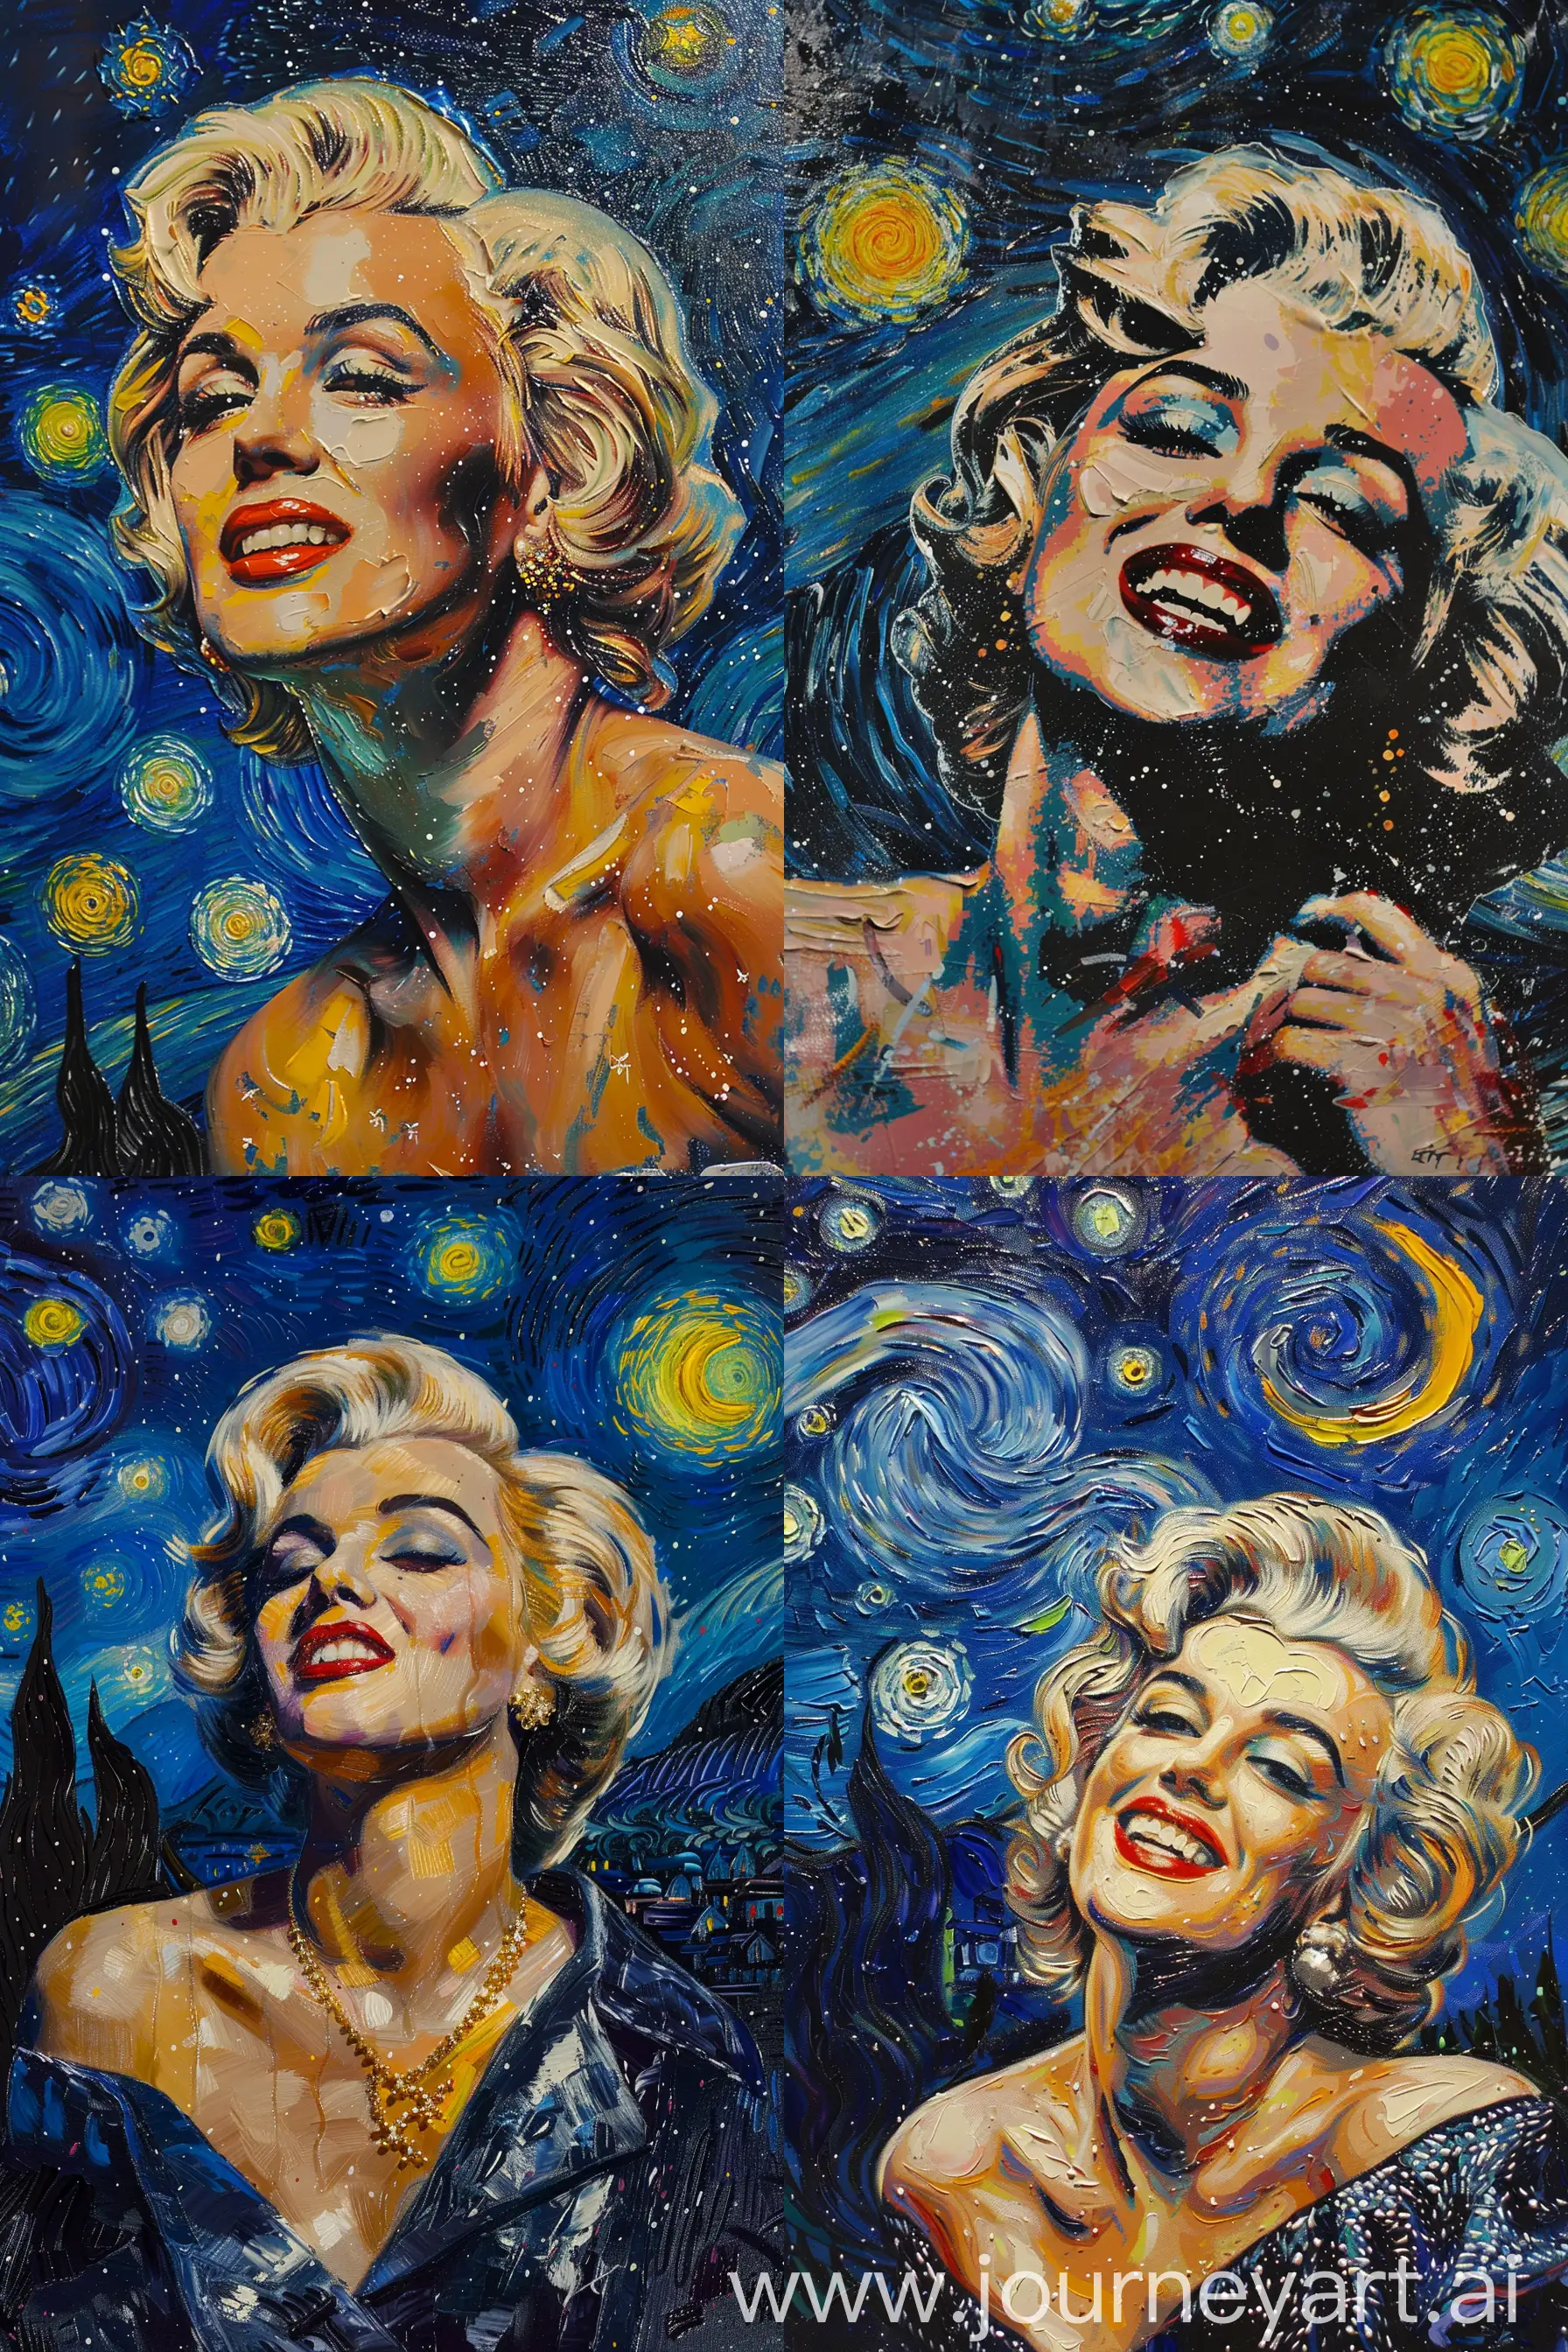 Marilyn-Monroe-Portrait-in-Van-Gogh-Style-with-Starry-Night-Background